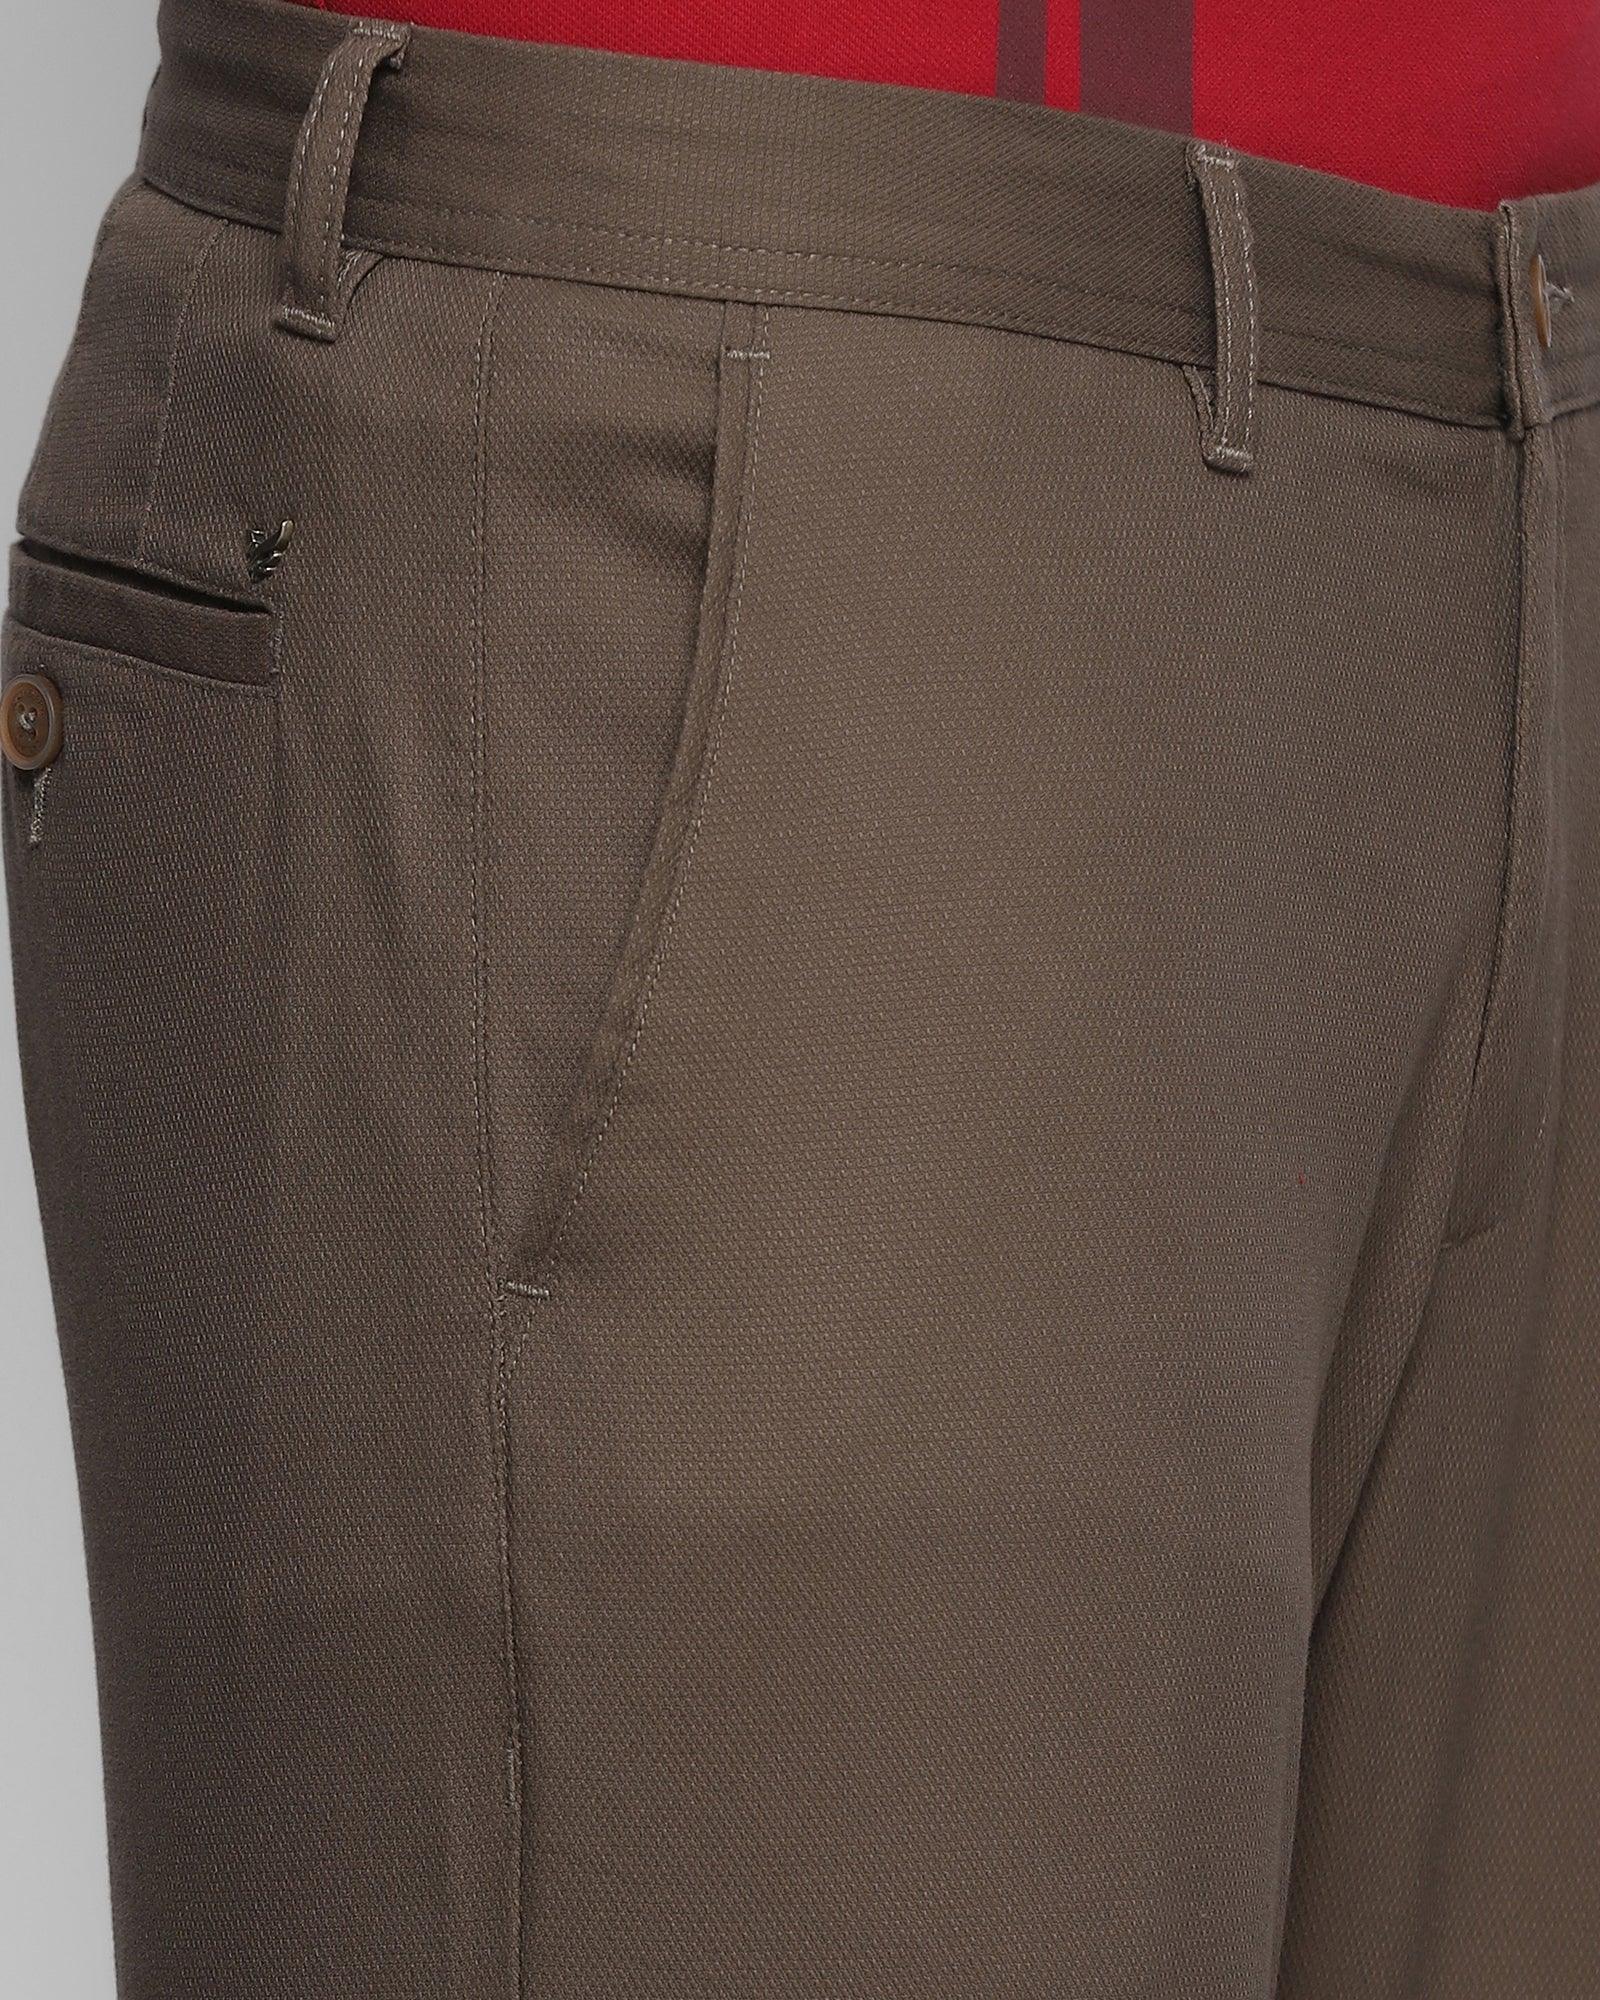 Slim Comfort B-95 Casual Mouse Textured Khakis - Kevin